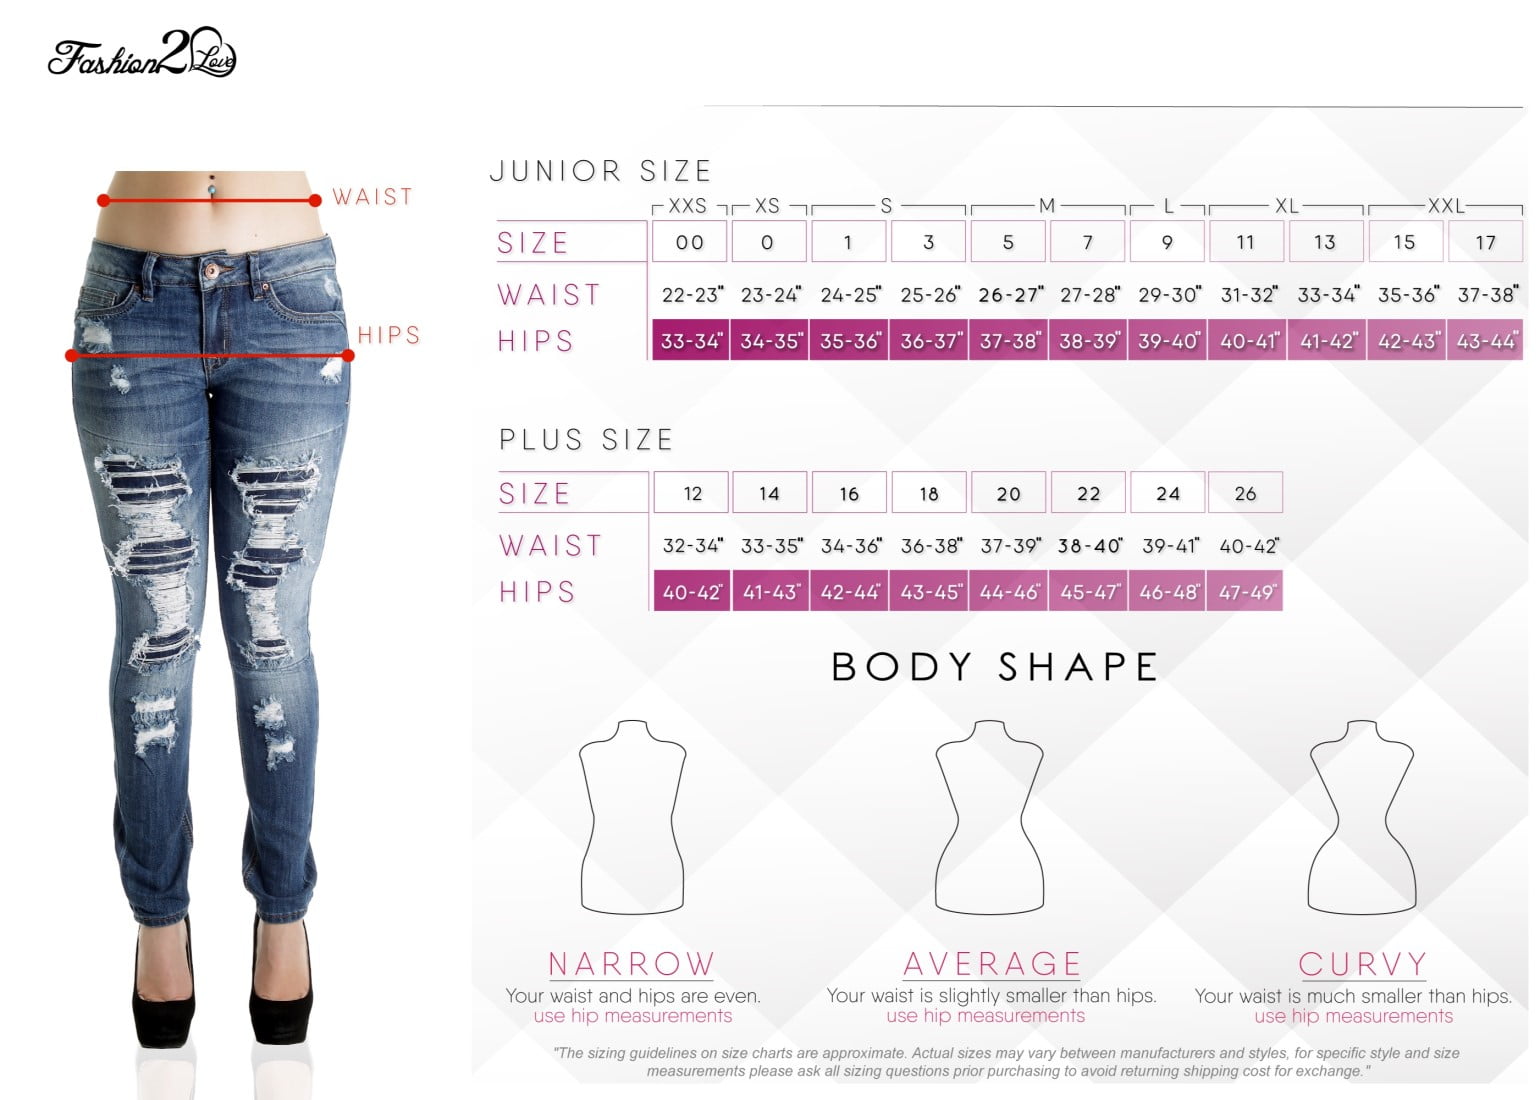 waist size for size 7 jeans